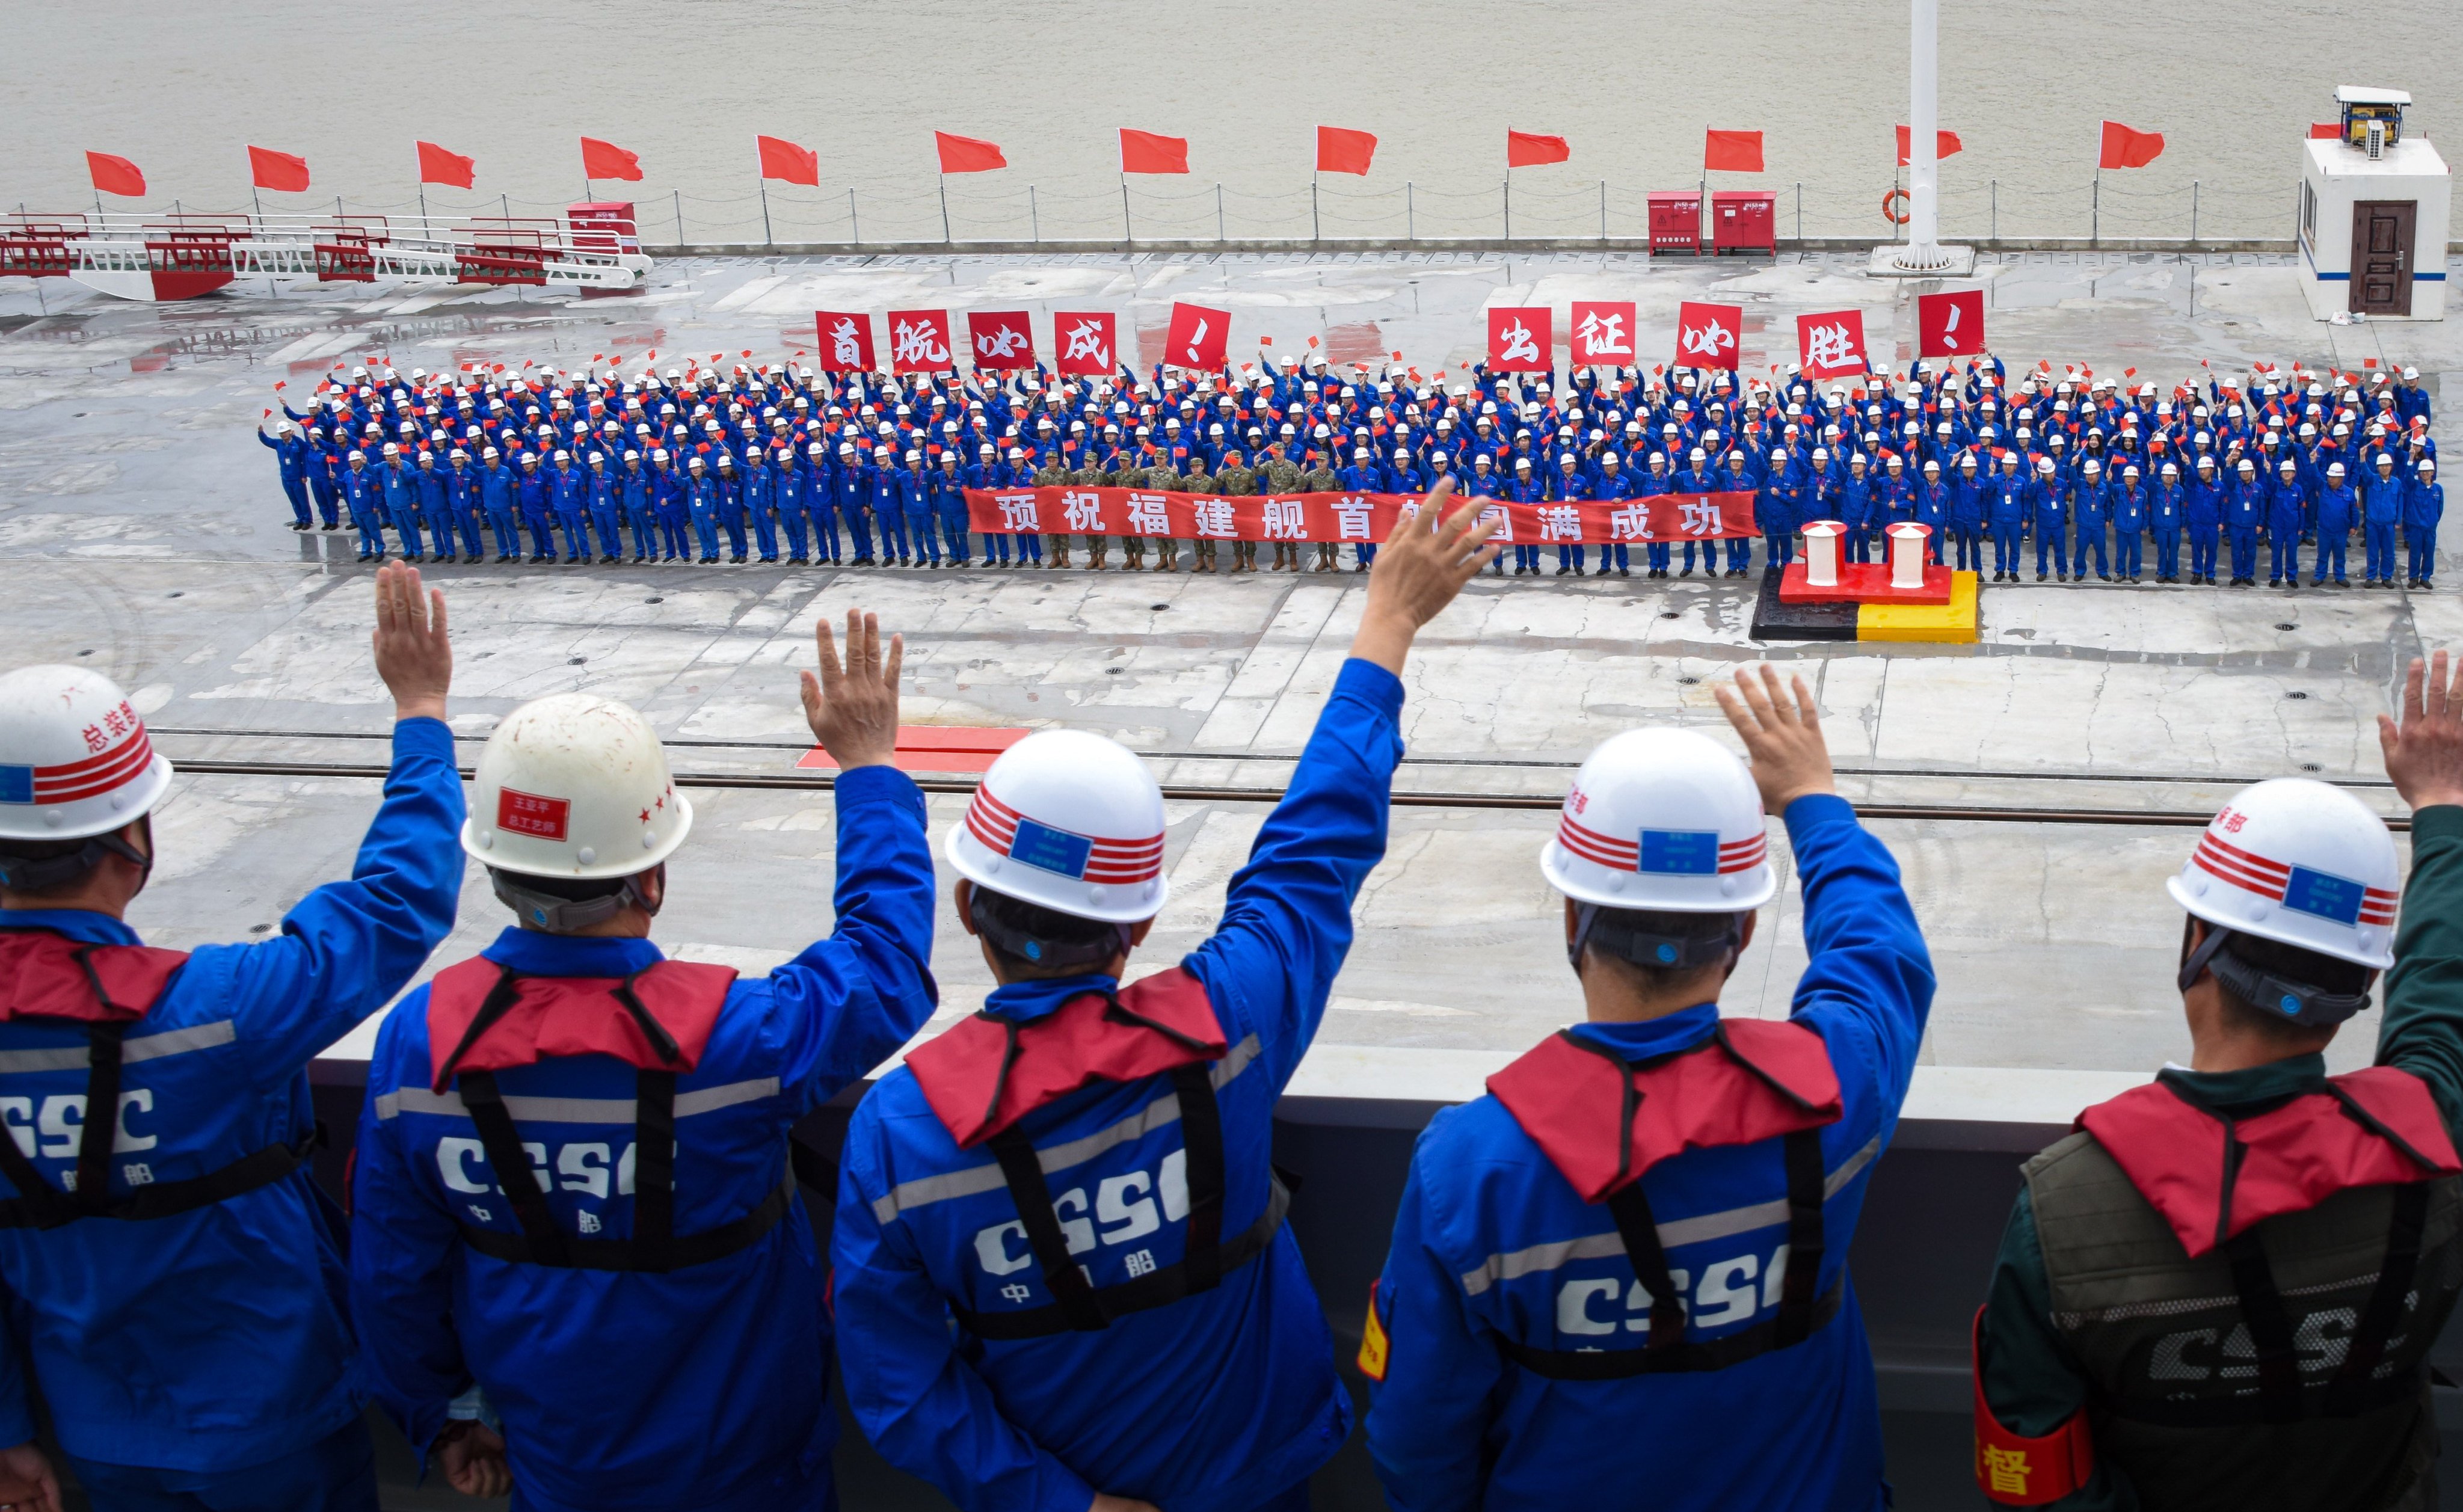 Well-wishers wave as China’s Fujian aircraft carrier leaves its dock in Shanghai on its maiden voyage to begin sea trials which are expected to take about a year. Photo: Xinhua